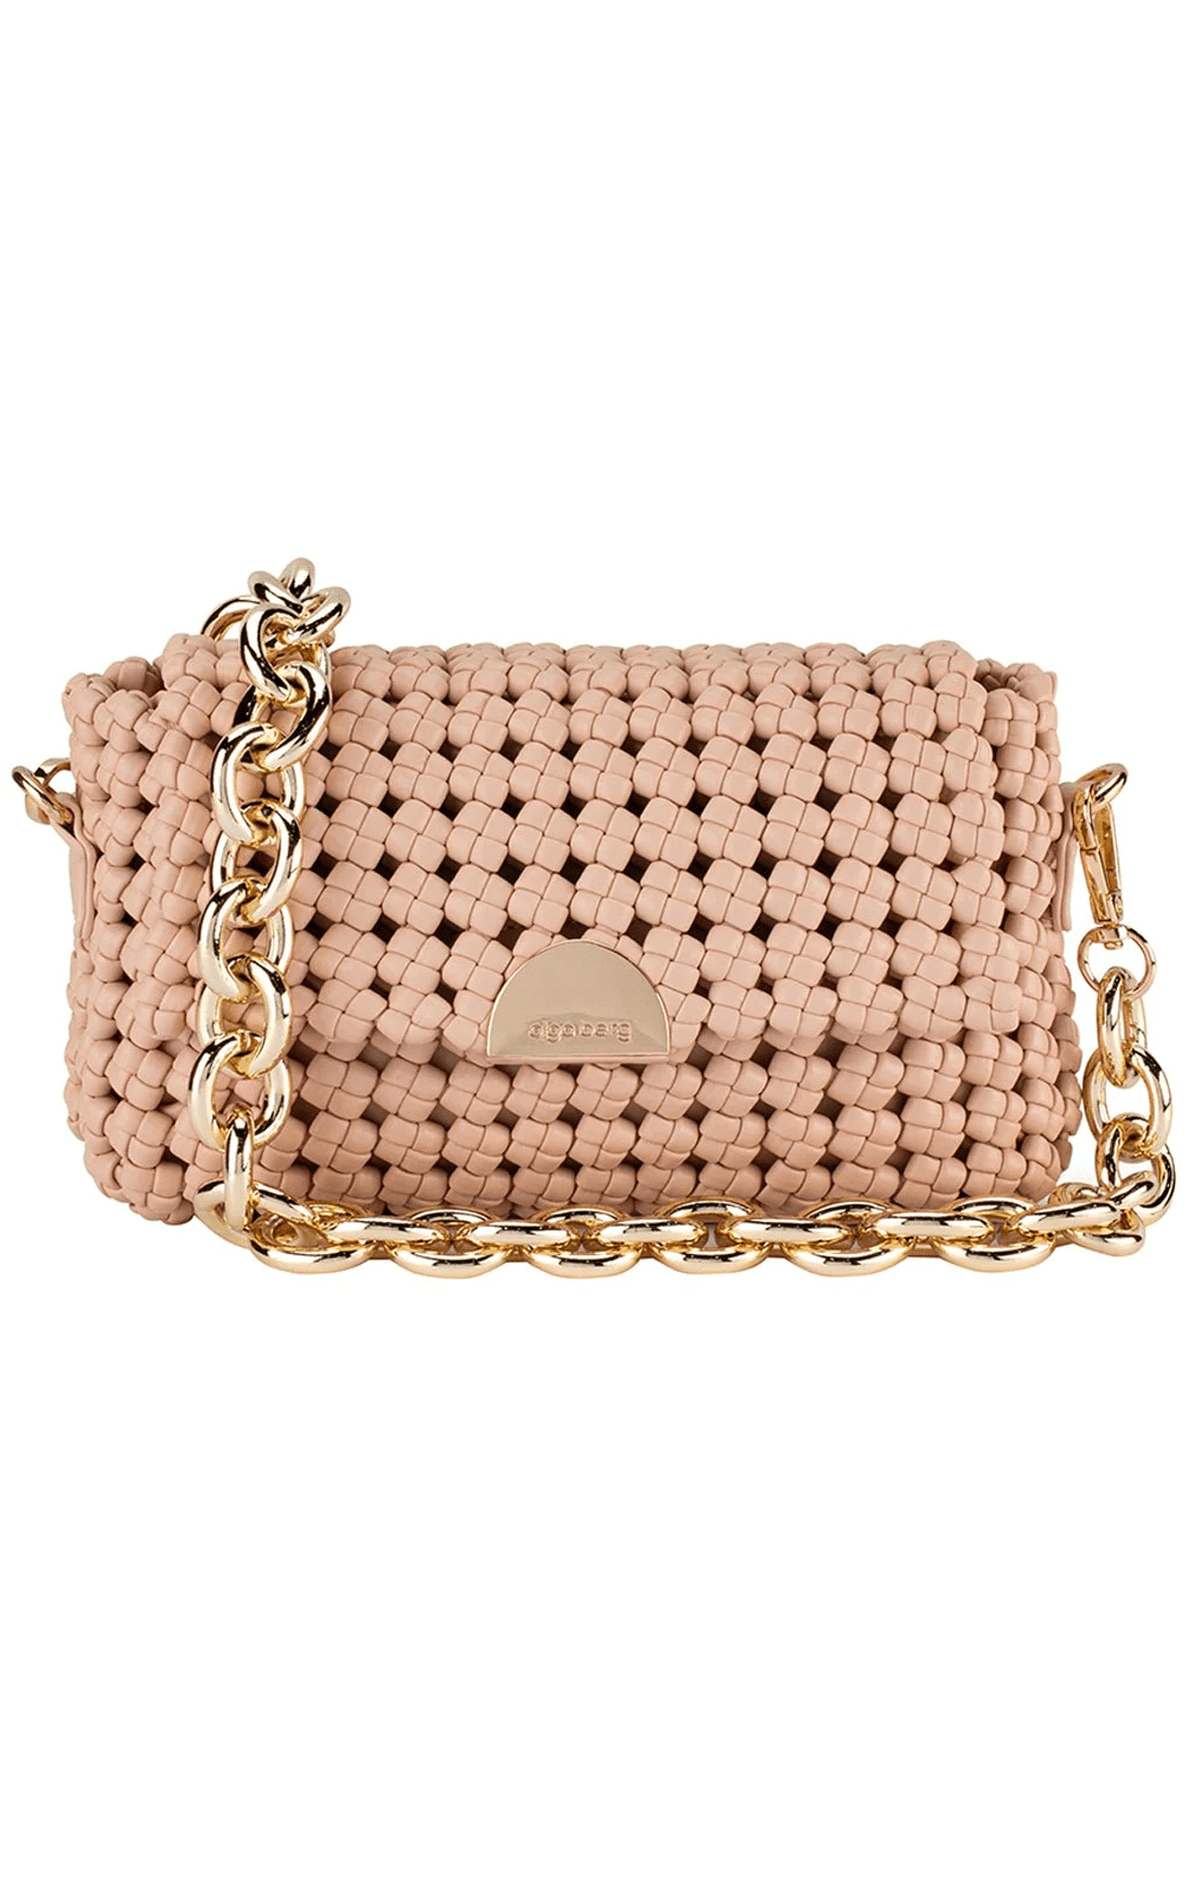 ACCESSORIES Bags Clutches One Size / Neutral GISELLE WOVEN SHOULDER BAG IN BLUSH